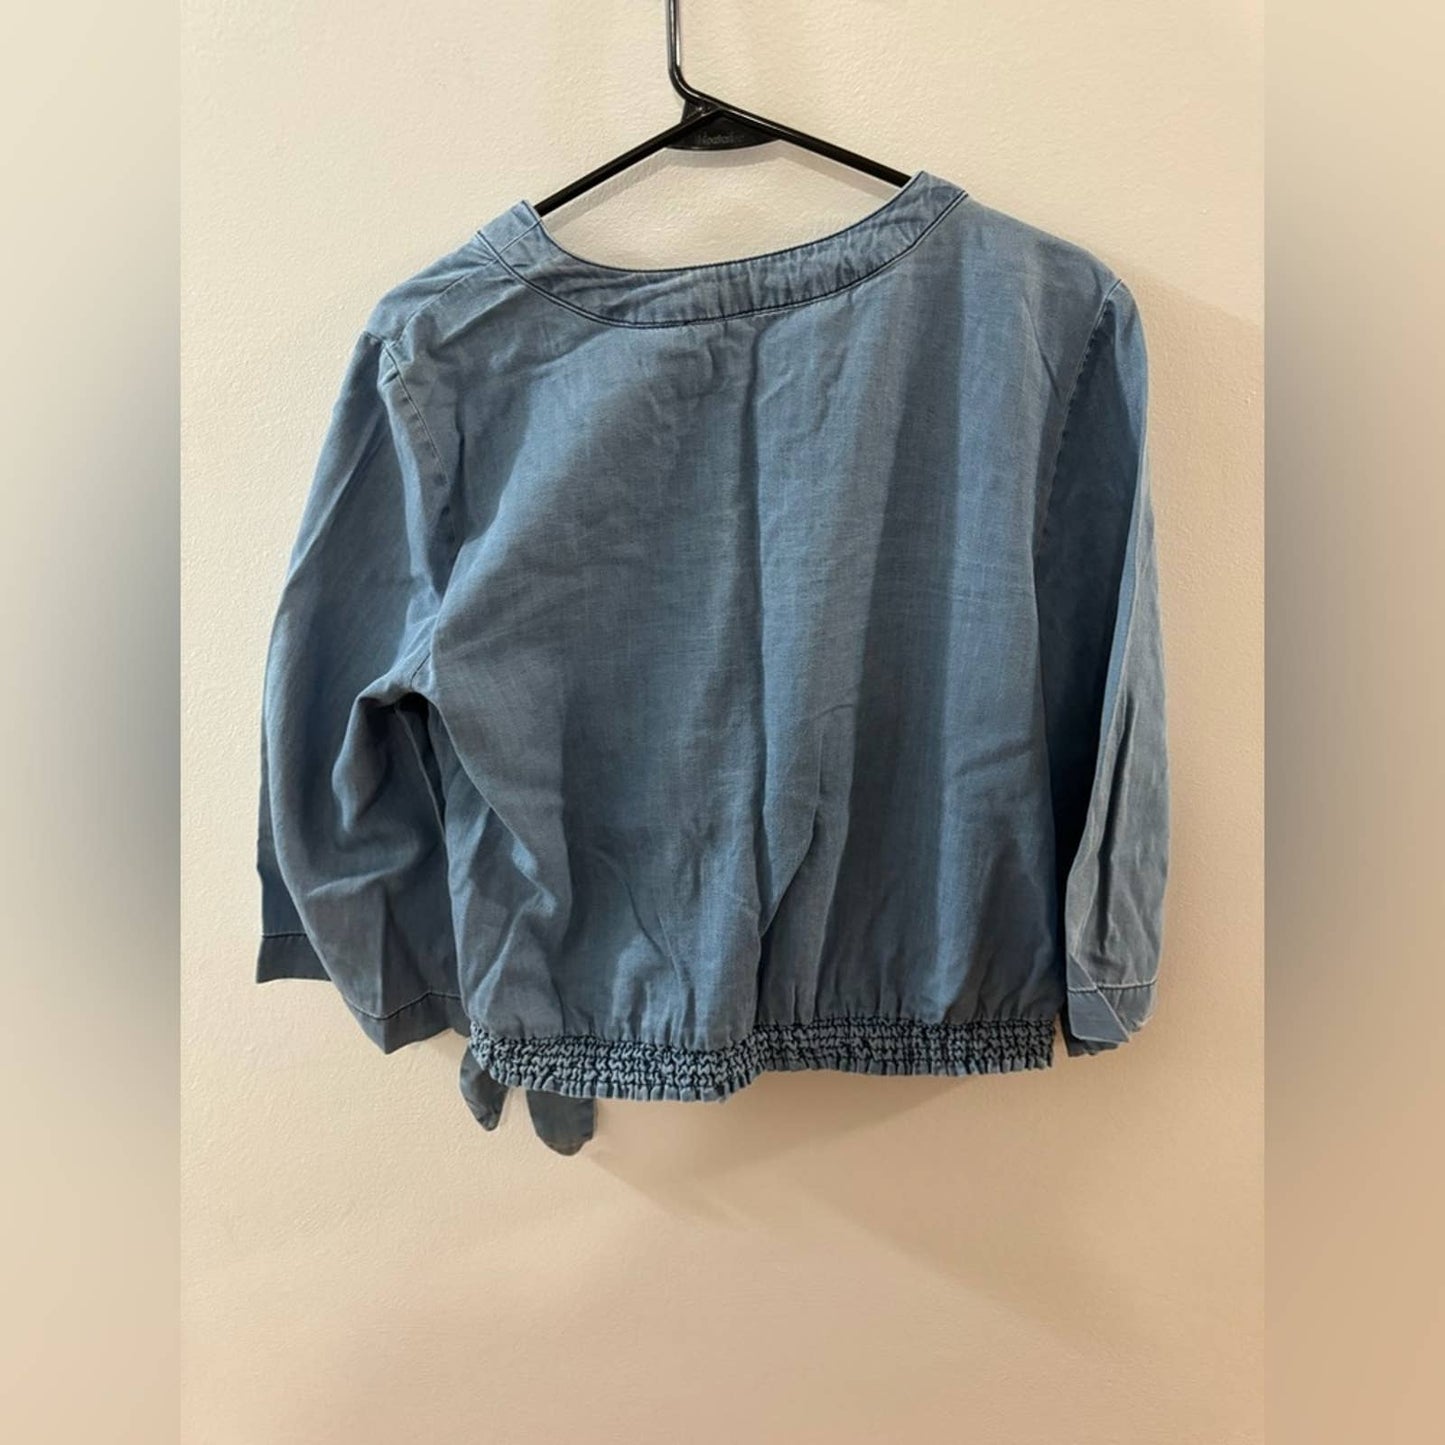 NWT MD Claire’s Long Sleeve Denim-Style Wrap/Tie Shirt